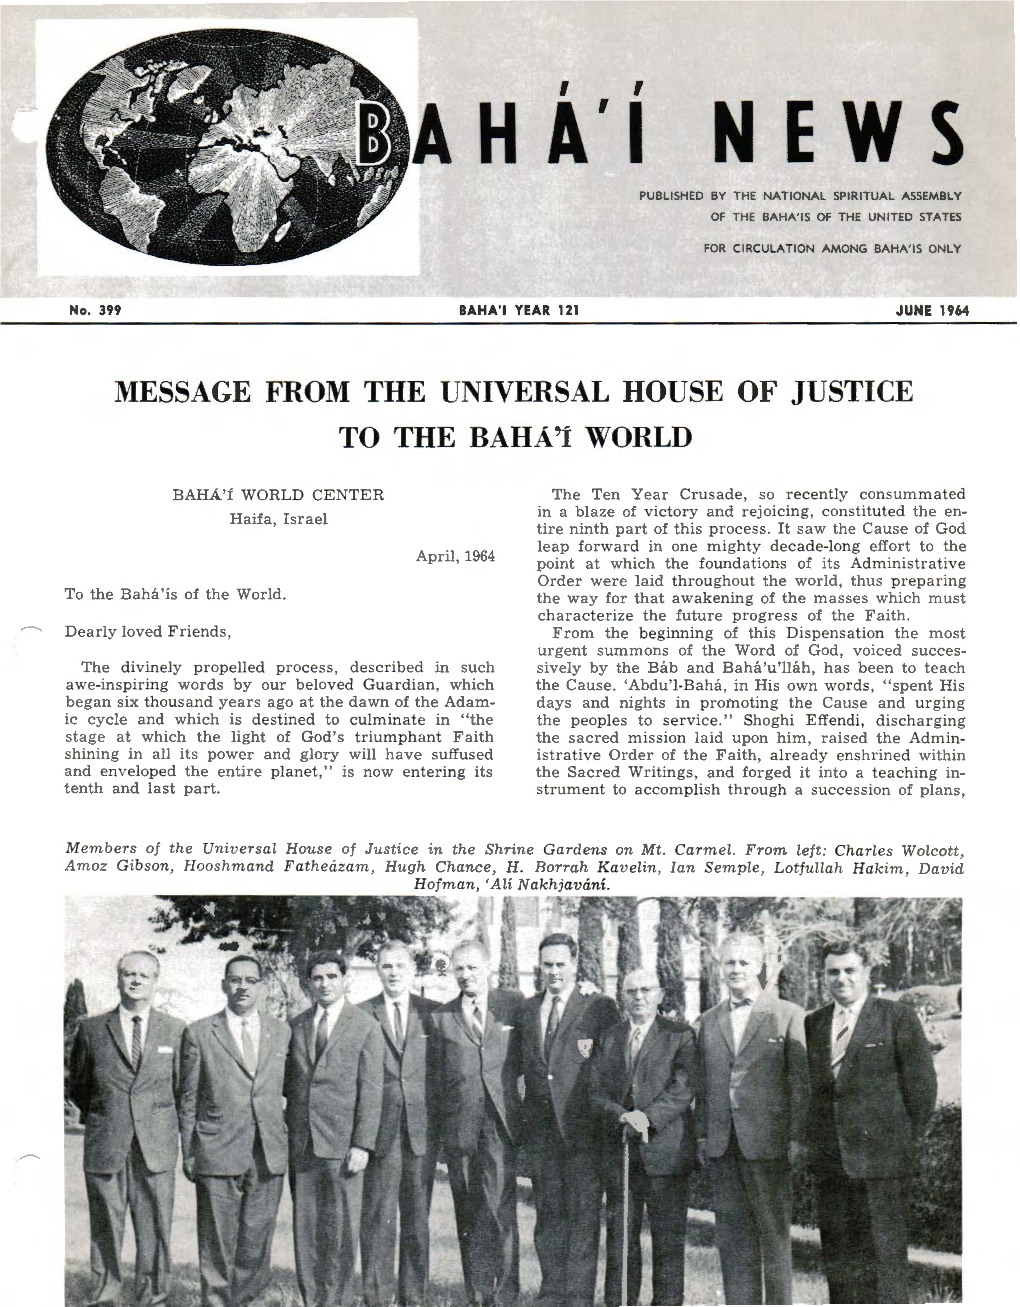 Message from the Universal House of Justice to the Baha'i World